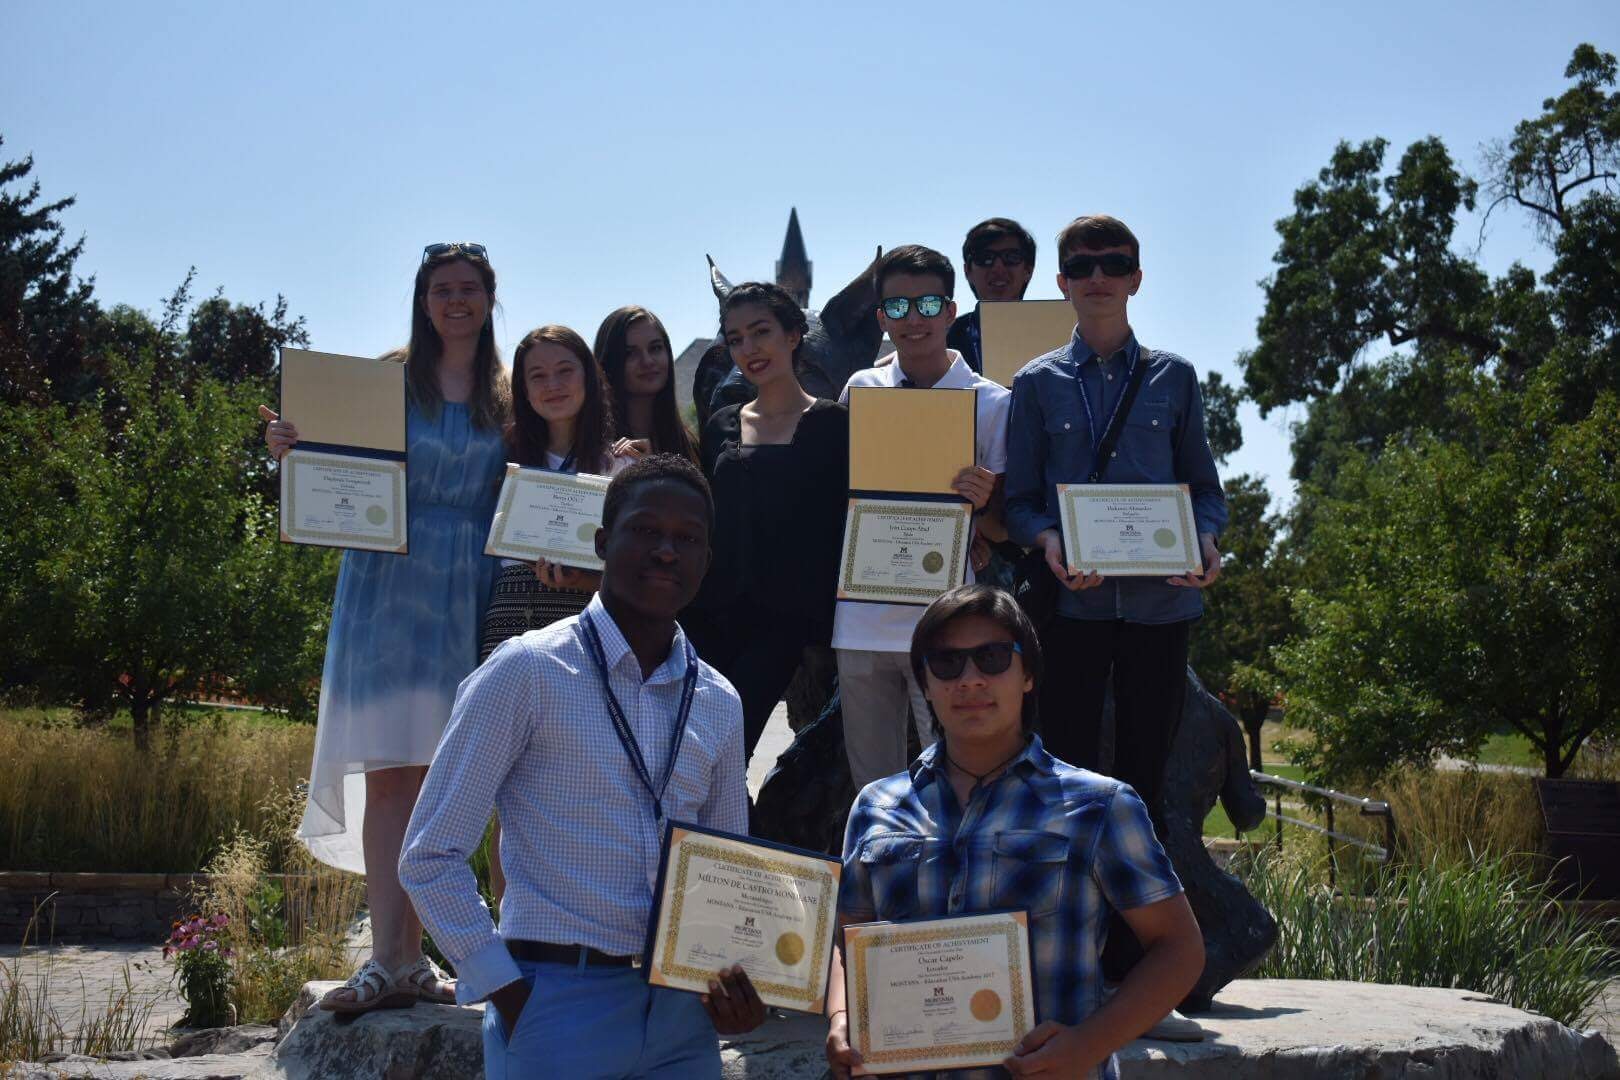 EducationUSA Academy students pose with their certificates